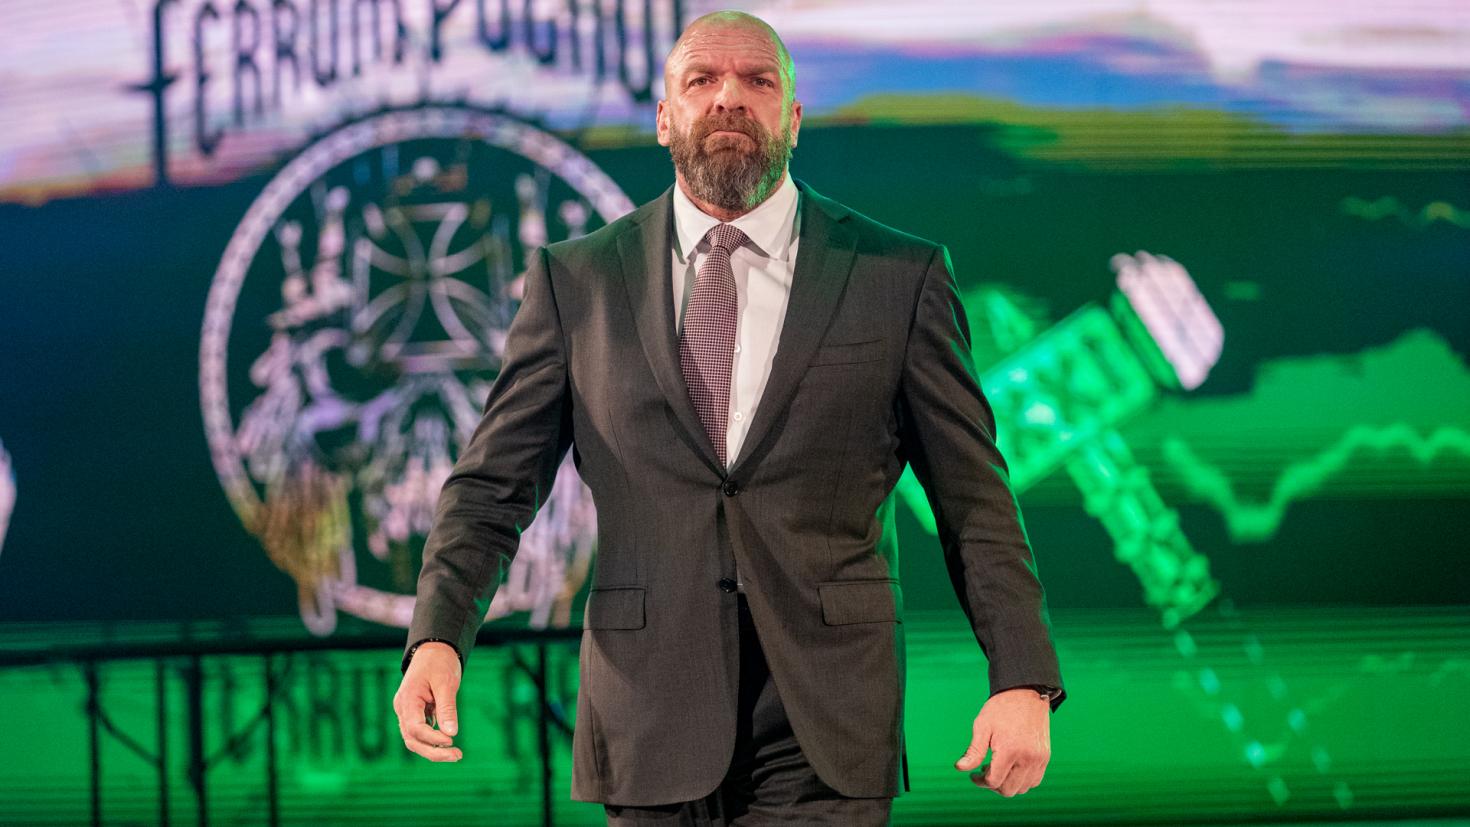 What kind of change in WWE can we expect with Triple H in charge?